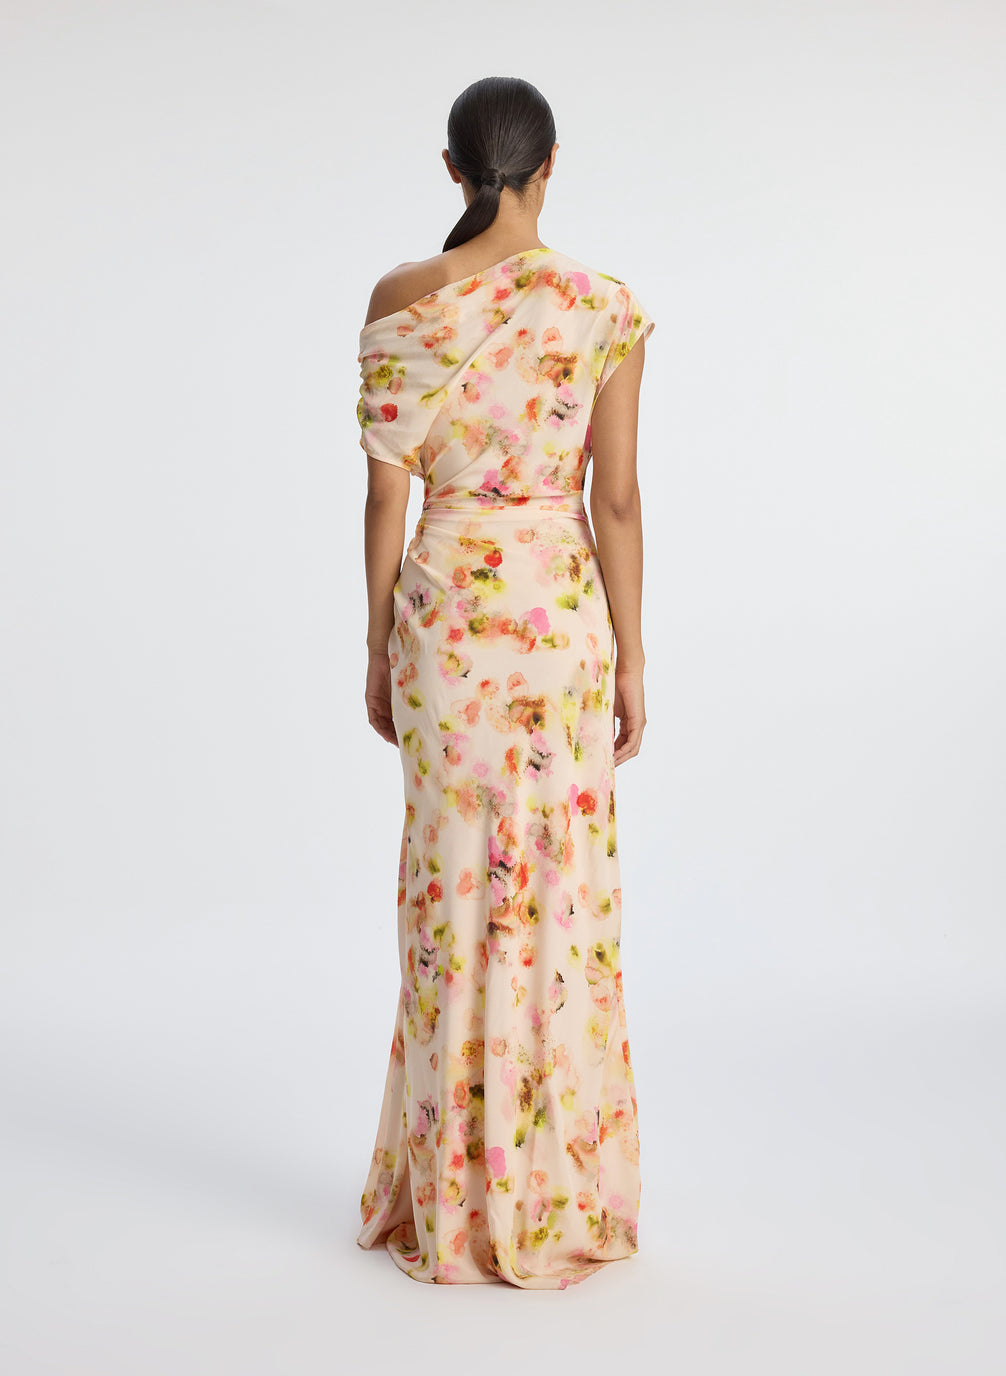 back  view of woman wearing abstract print satin one shoulder maxi dress